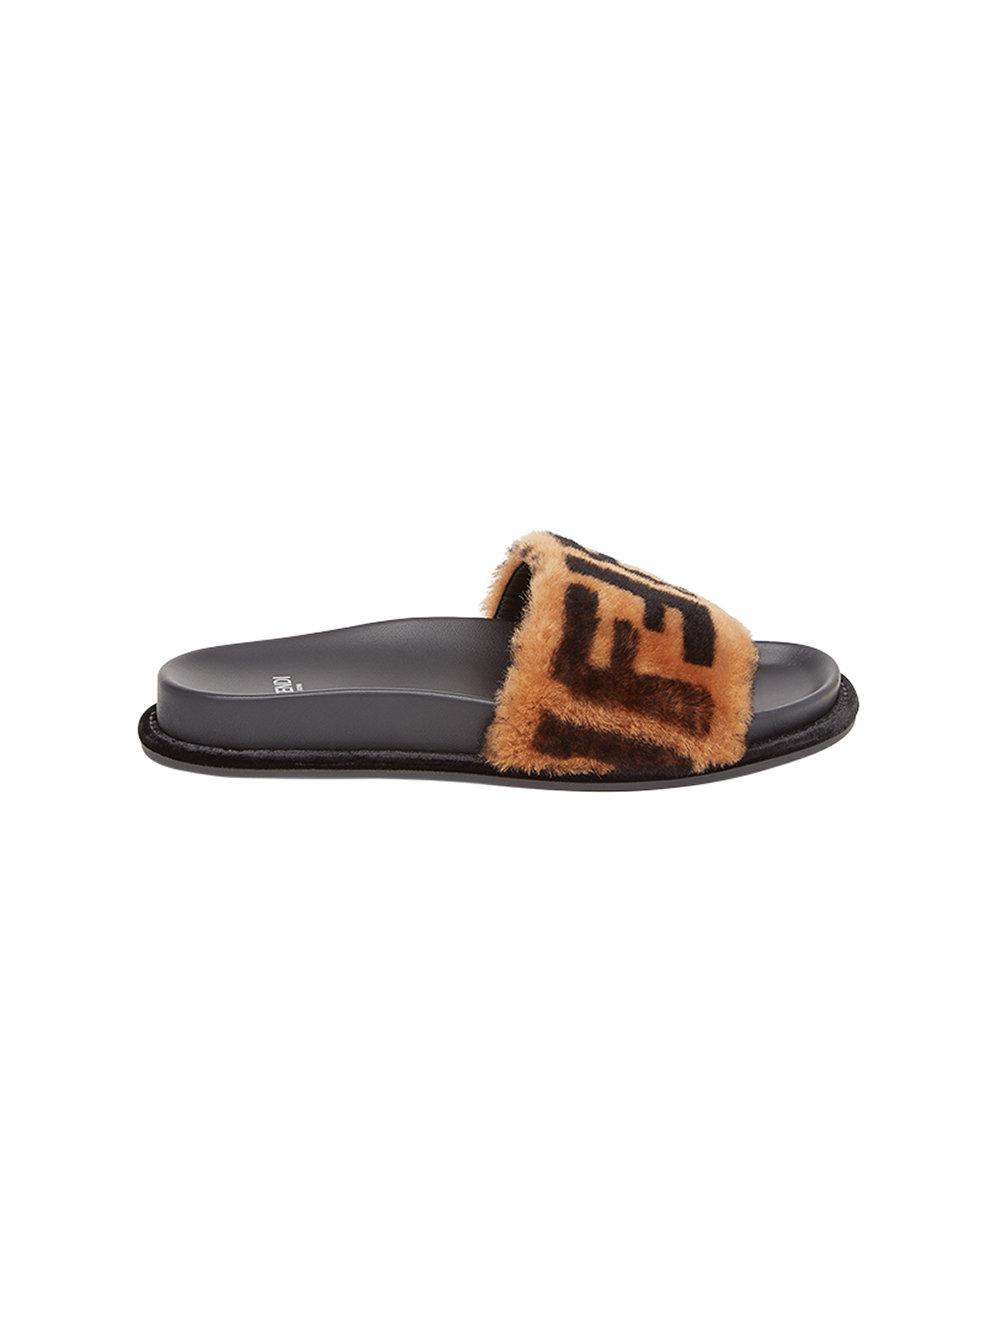 Fendi Leather Shearling Slippers in Brown - Lyst